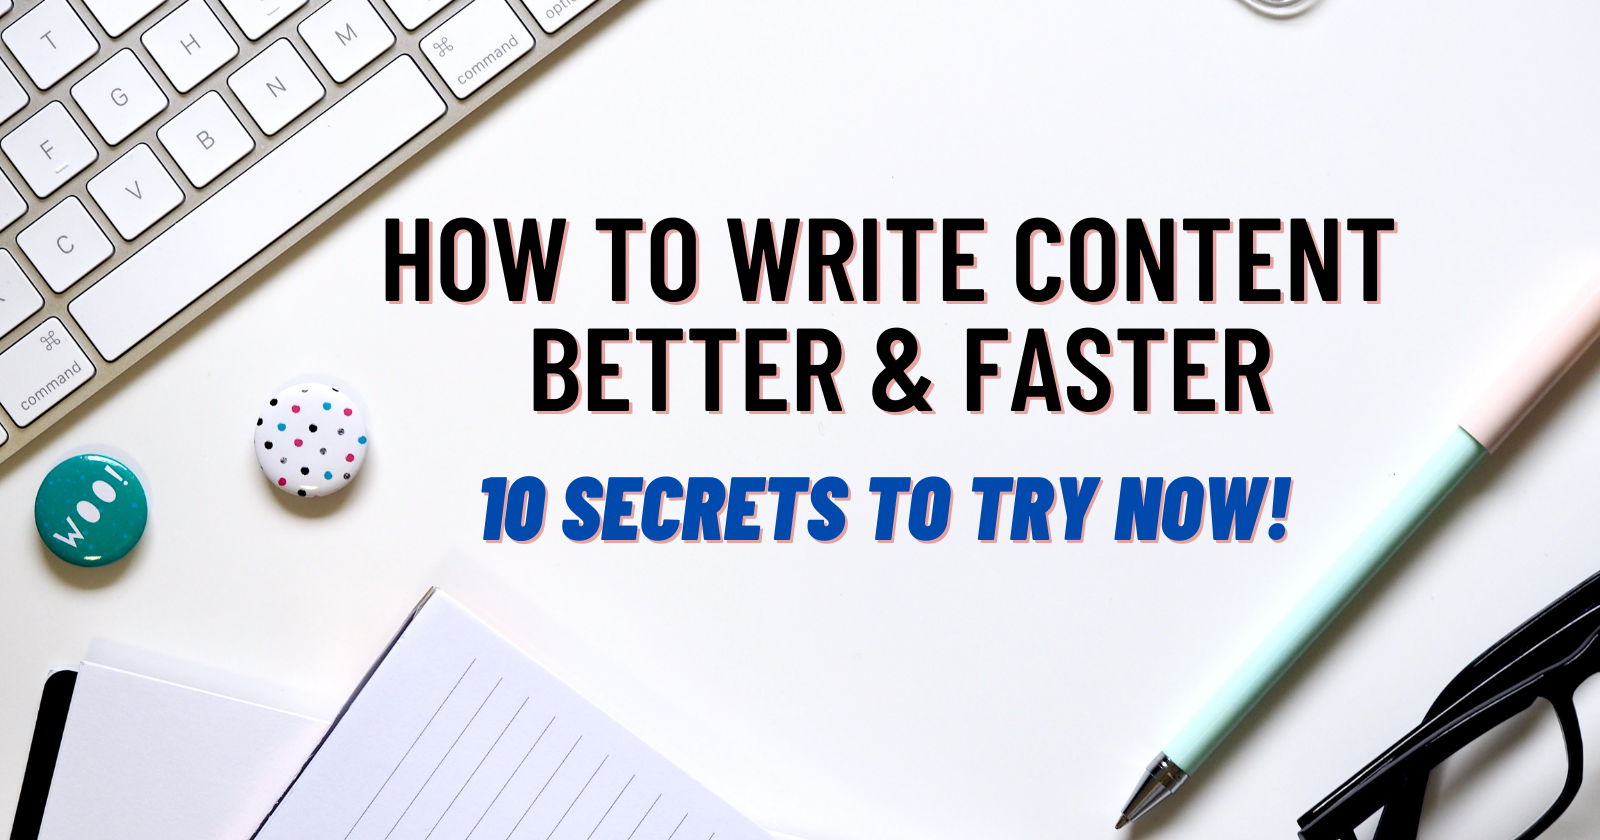 How to Write Content Better & Faster: 28 Secrets to Try Now